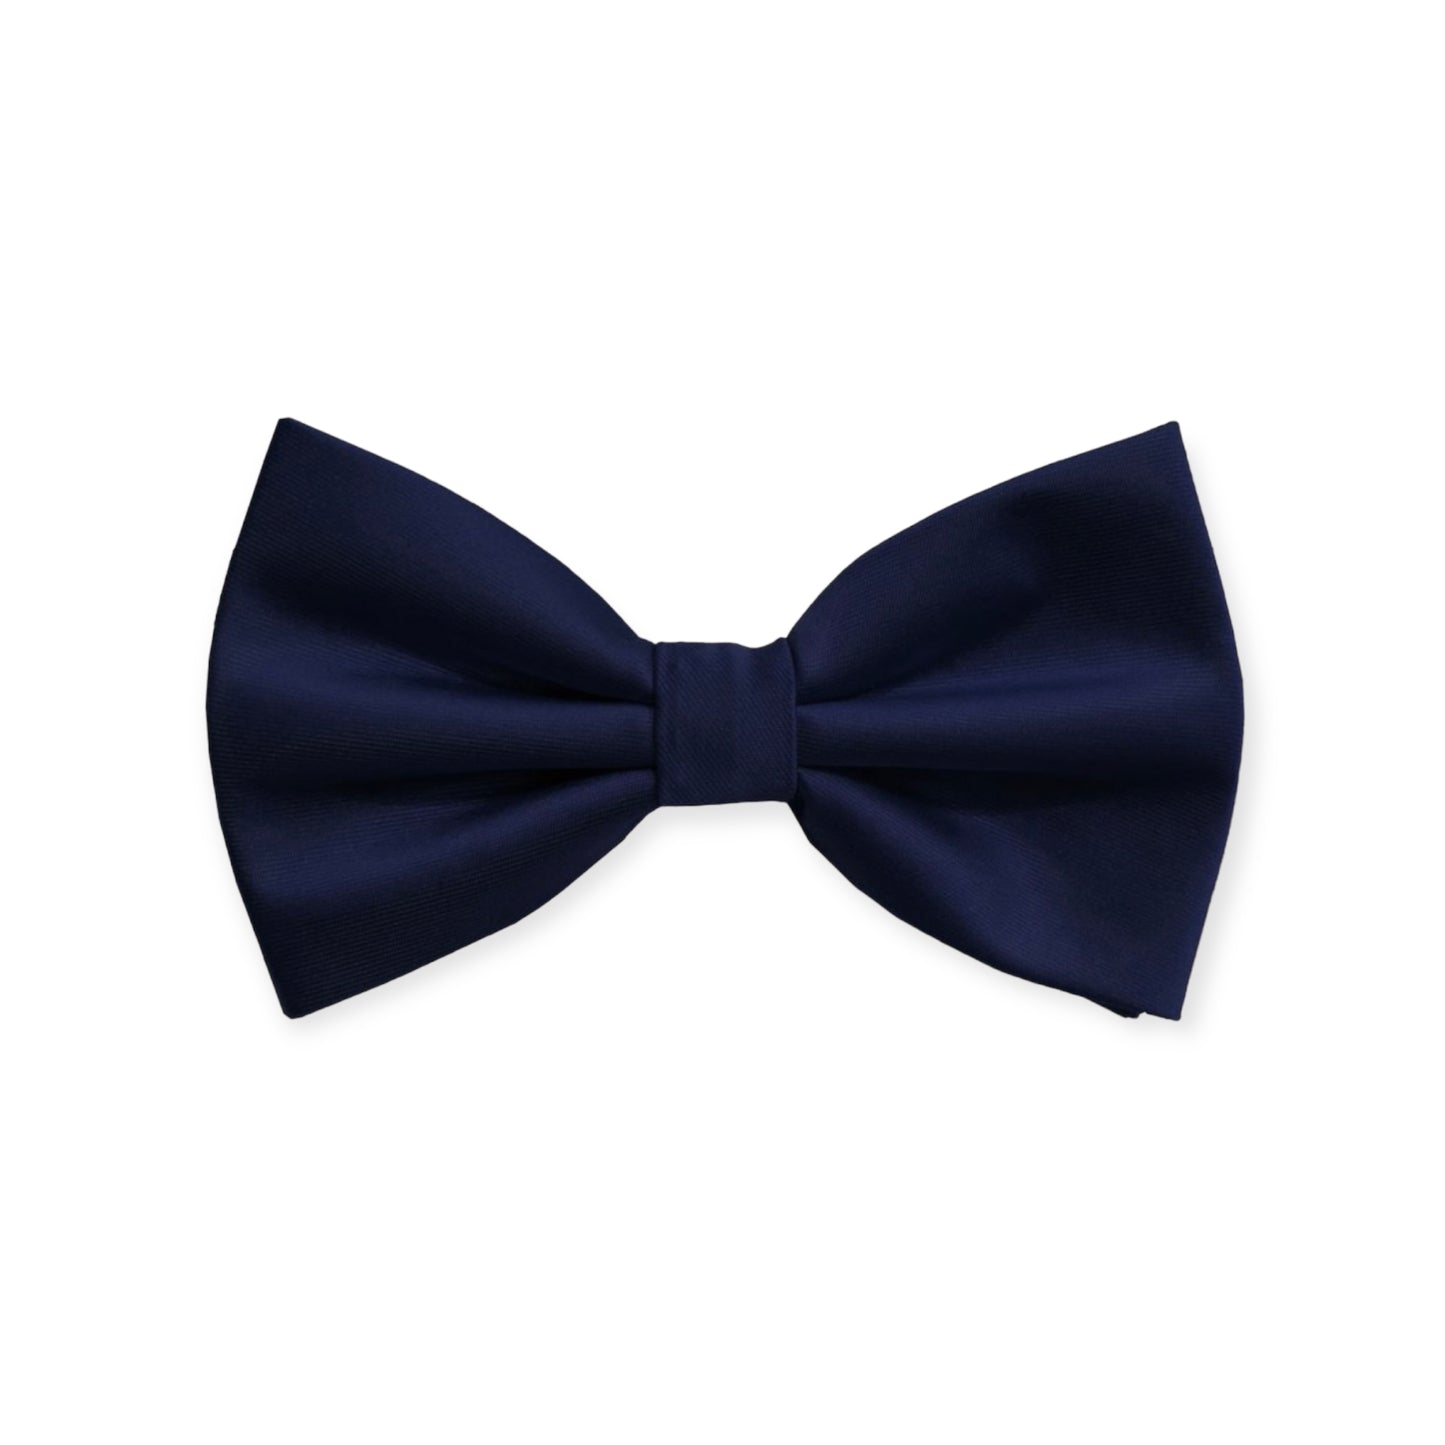 Solid Navy Bow Tie